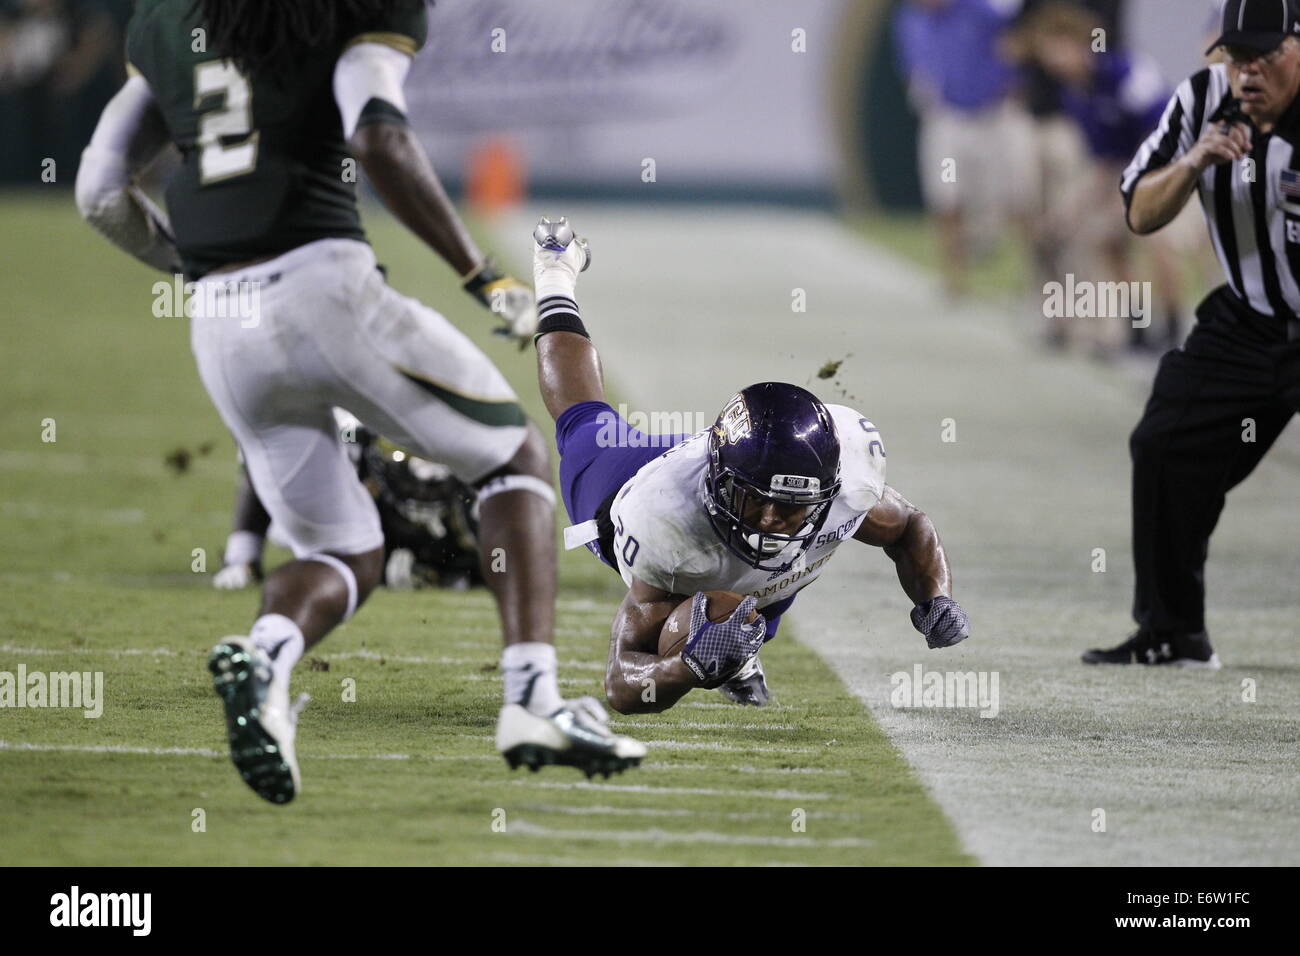 Florida, US. 30th Aug, 2014.Western Carolina running back Darius Ramsey (20) dives for a first down against the South Florida defense in the third quarter at Raymond James Stadium in Tampa, Florida on Saturday, August 30, 2014. South Florida defeated Western Carolina 36 to 31. Credit:  Octavio Jones/Tampa Bay Times/ZUMA Wire/Alamy Live News Stock Photo